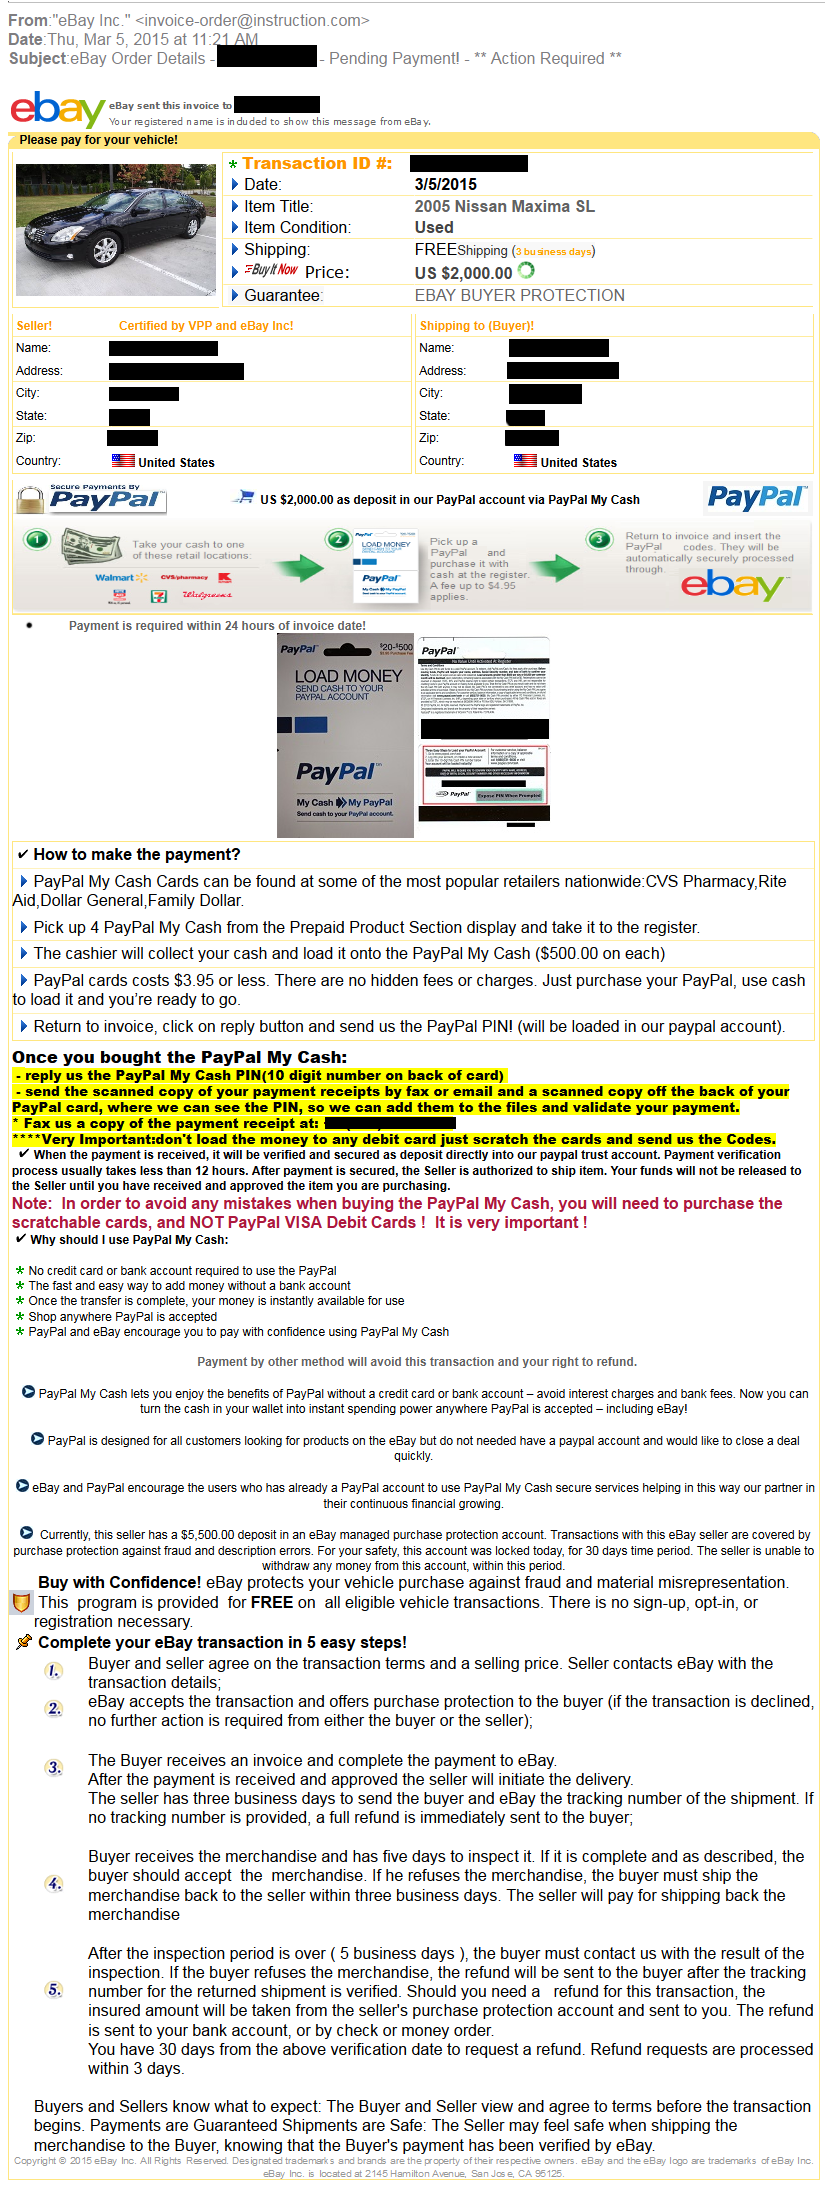 eBay Motors Scam: How To Spot and Get Your Money Back - Payback